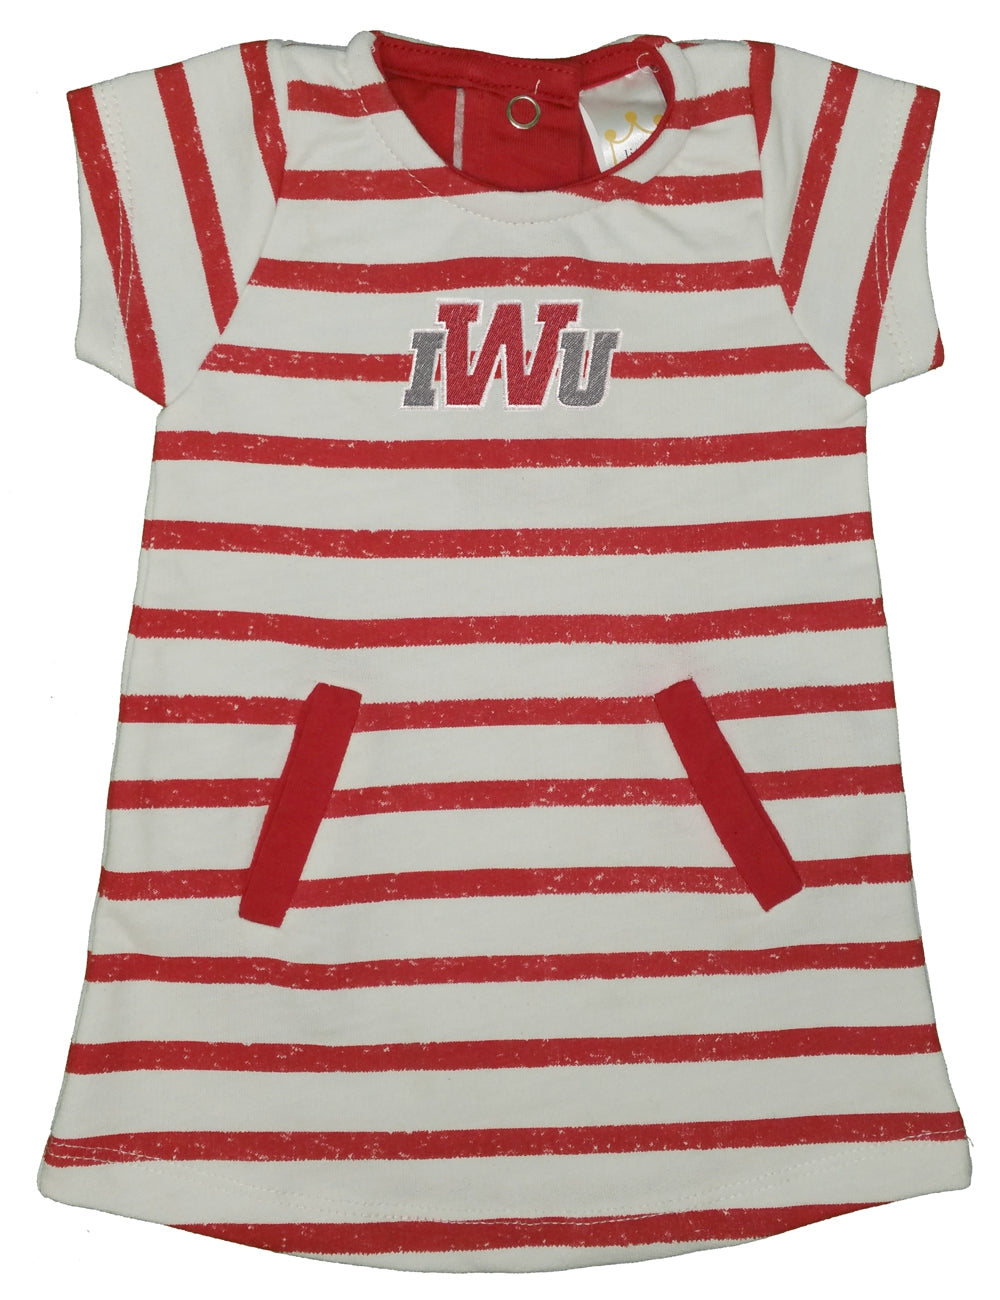 French Terry Dress, Red/White